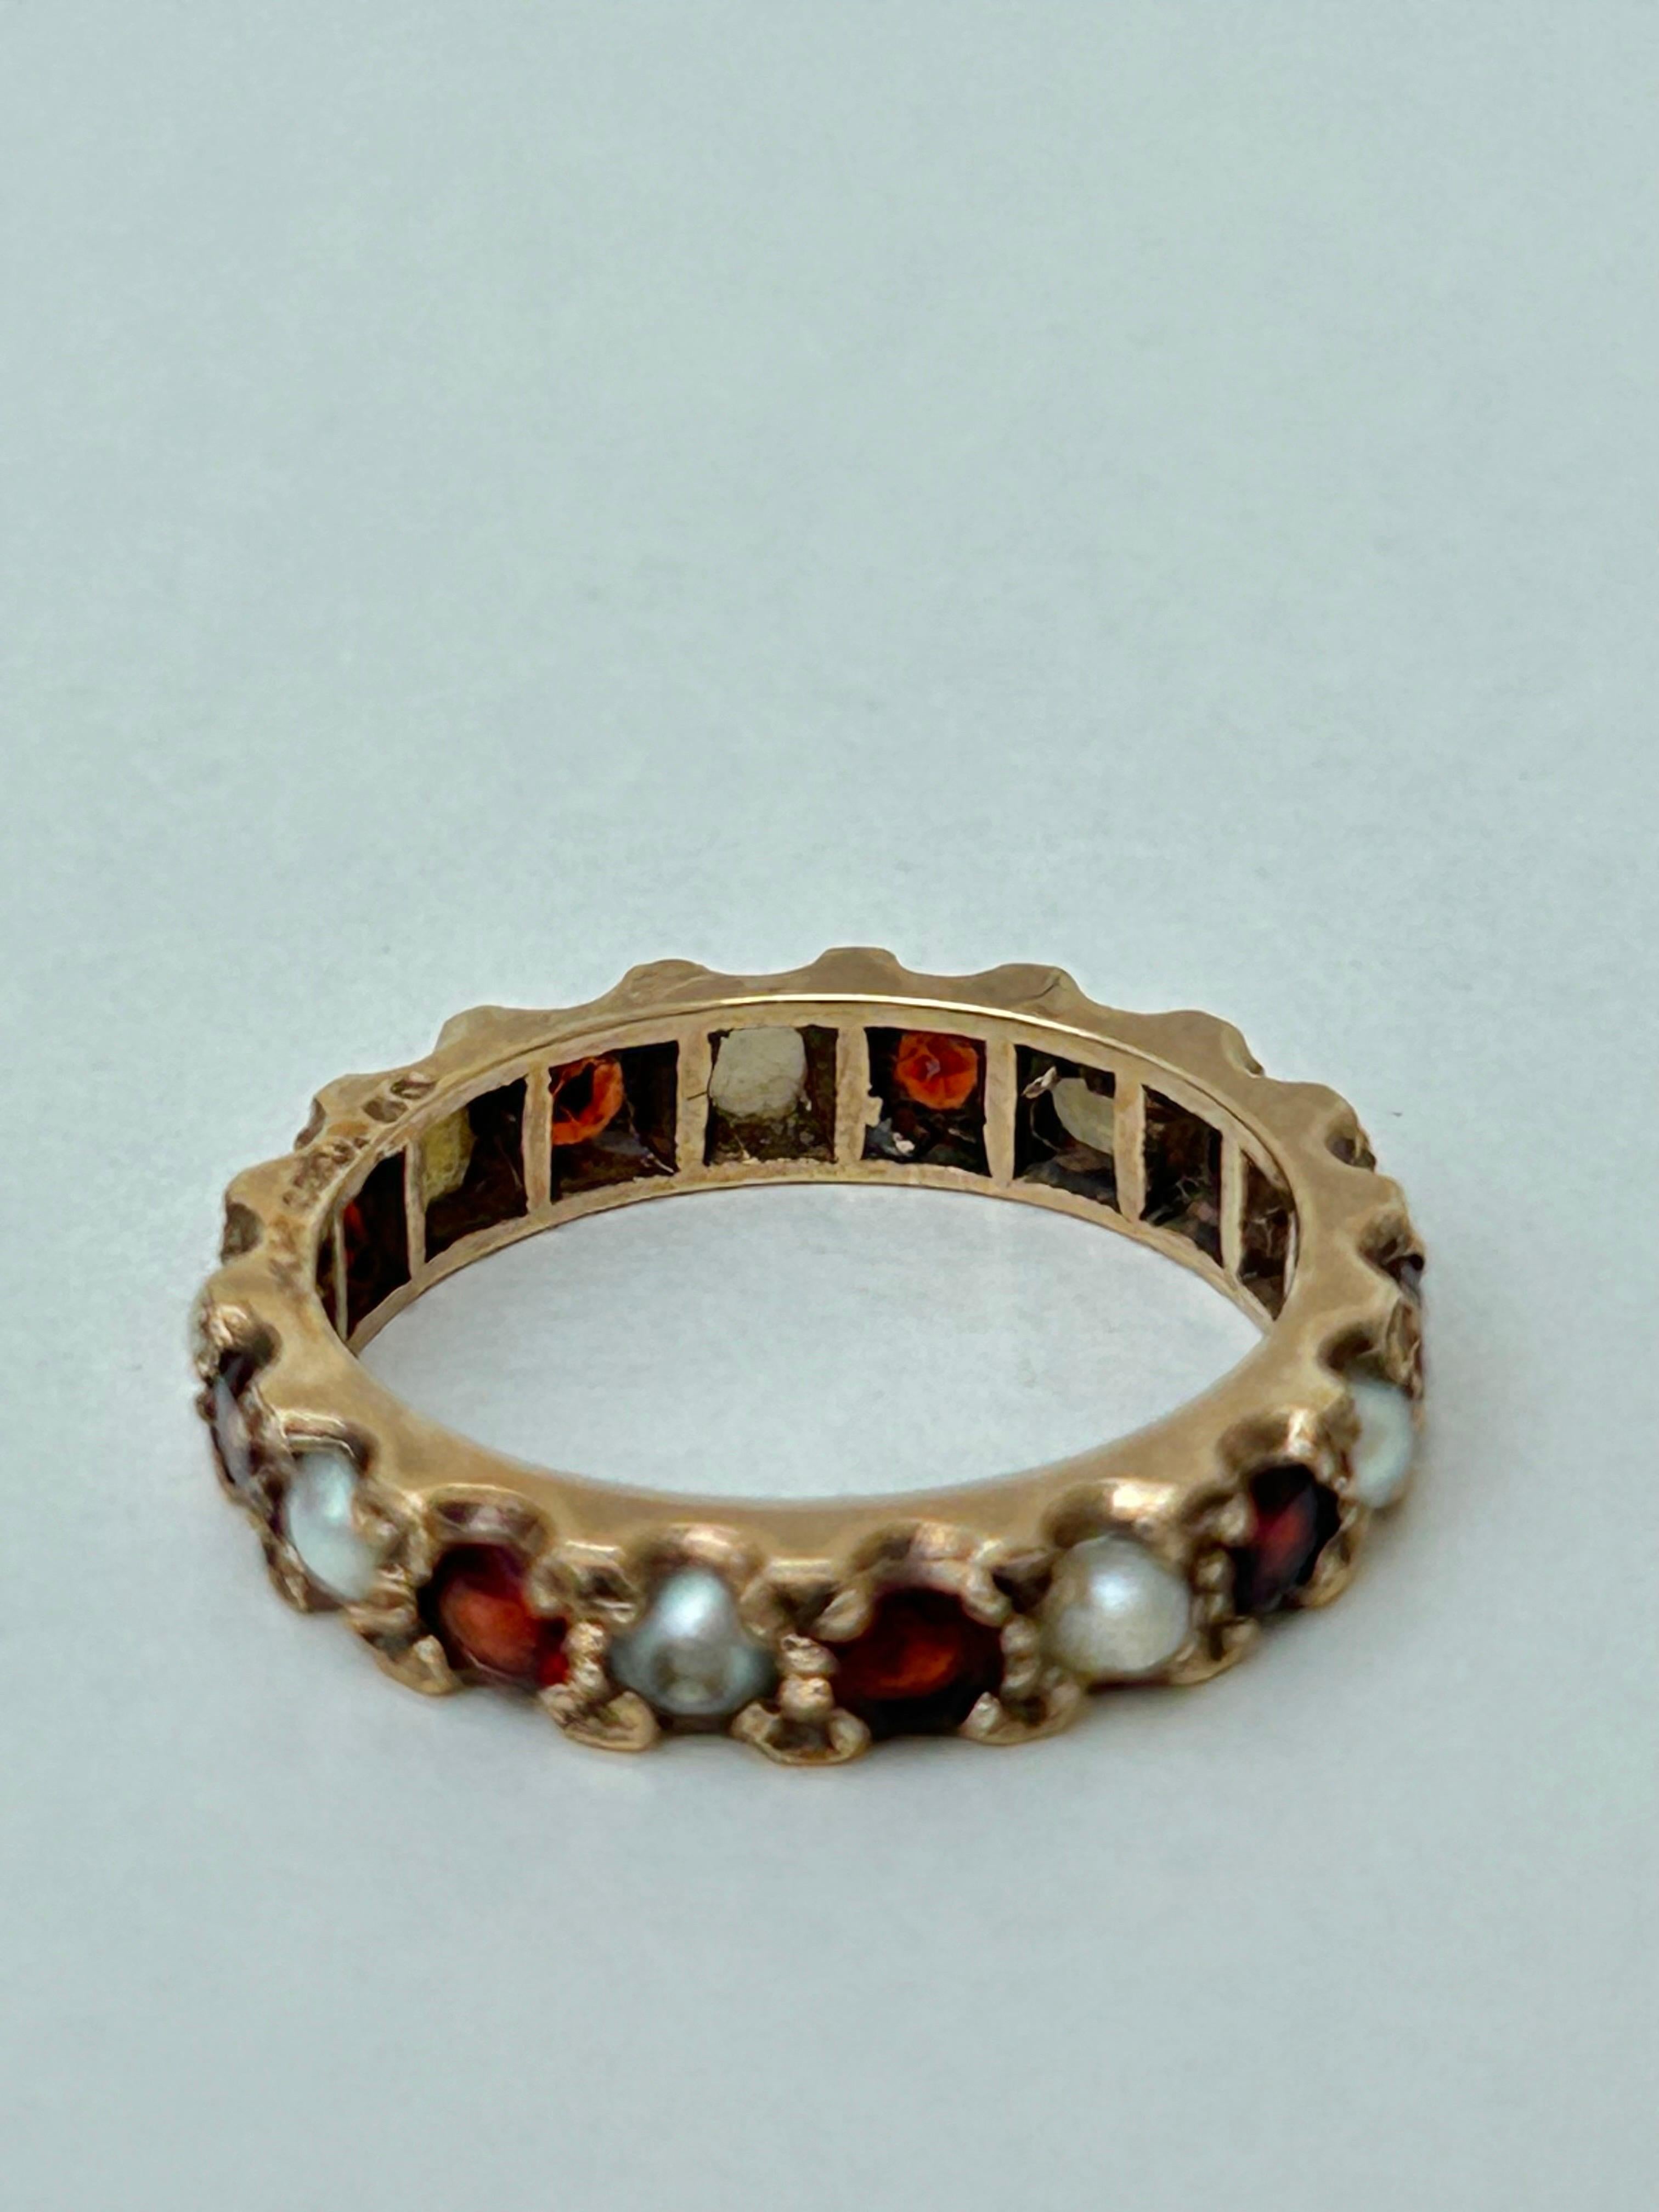 Vintage 9 Carat Yellow Gold Garnet and Pearl Full Eternity Band Ring In Good Condition For Sale In Chipping Campden, GB